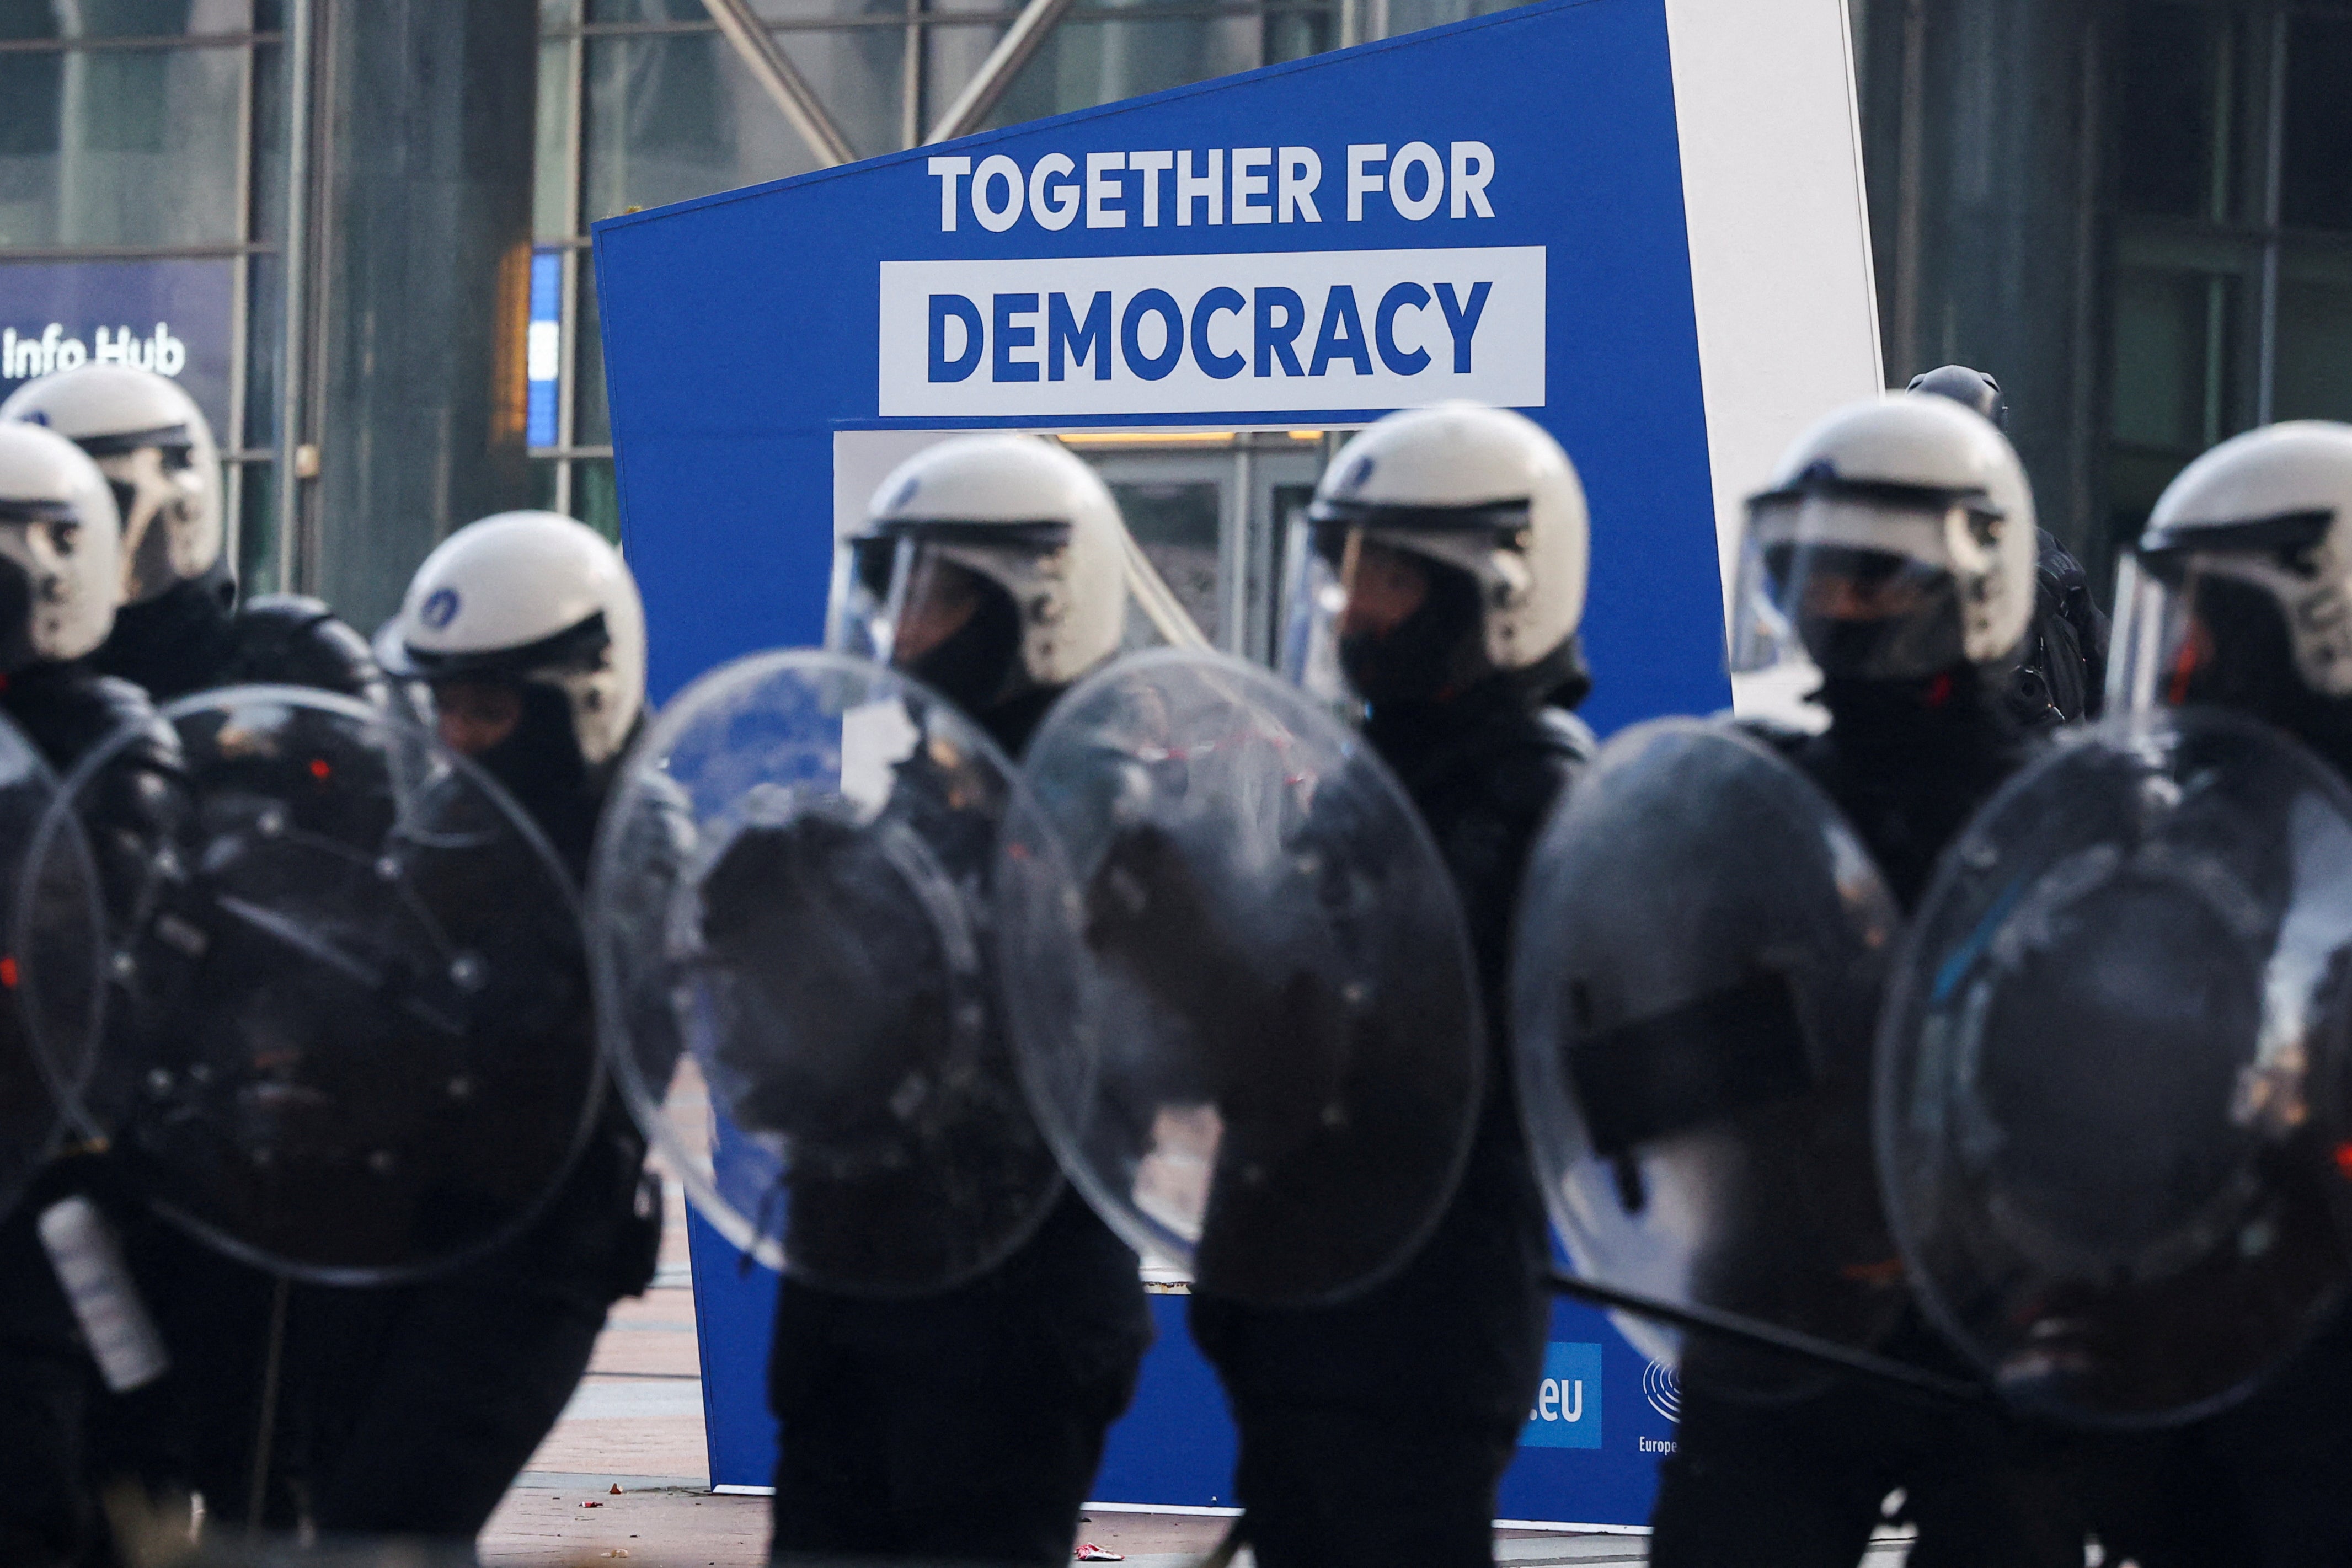 Police officers in riot gear stand guard in front of the European parliament